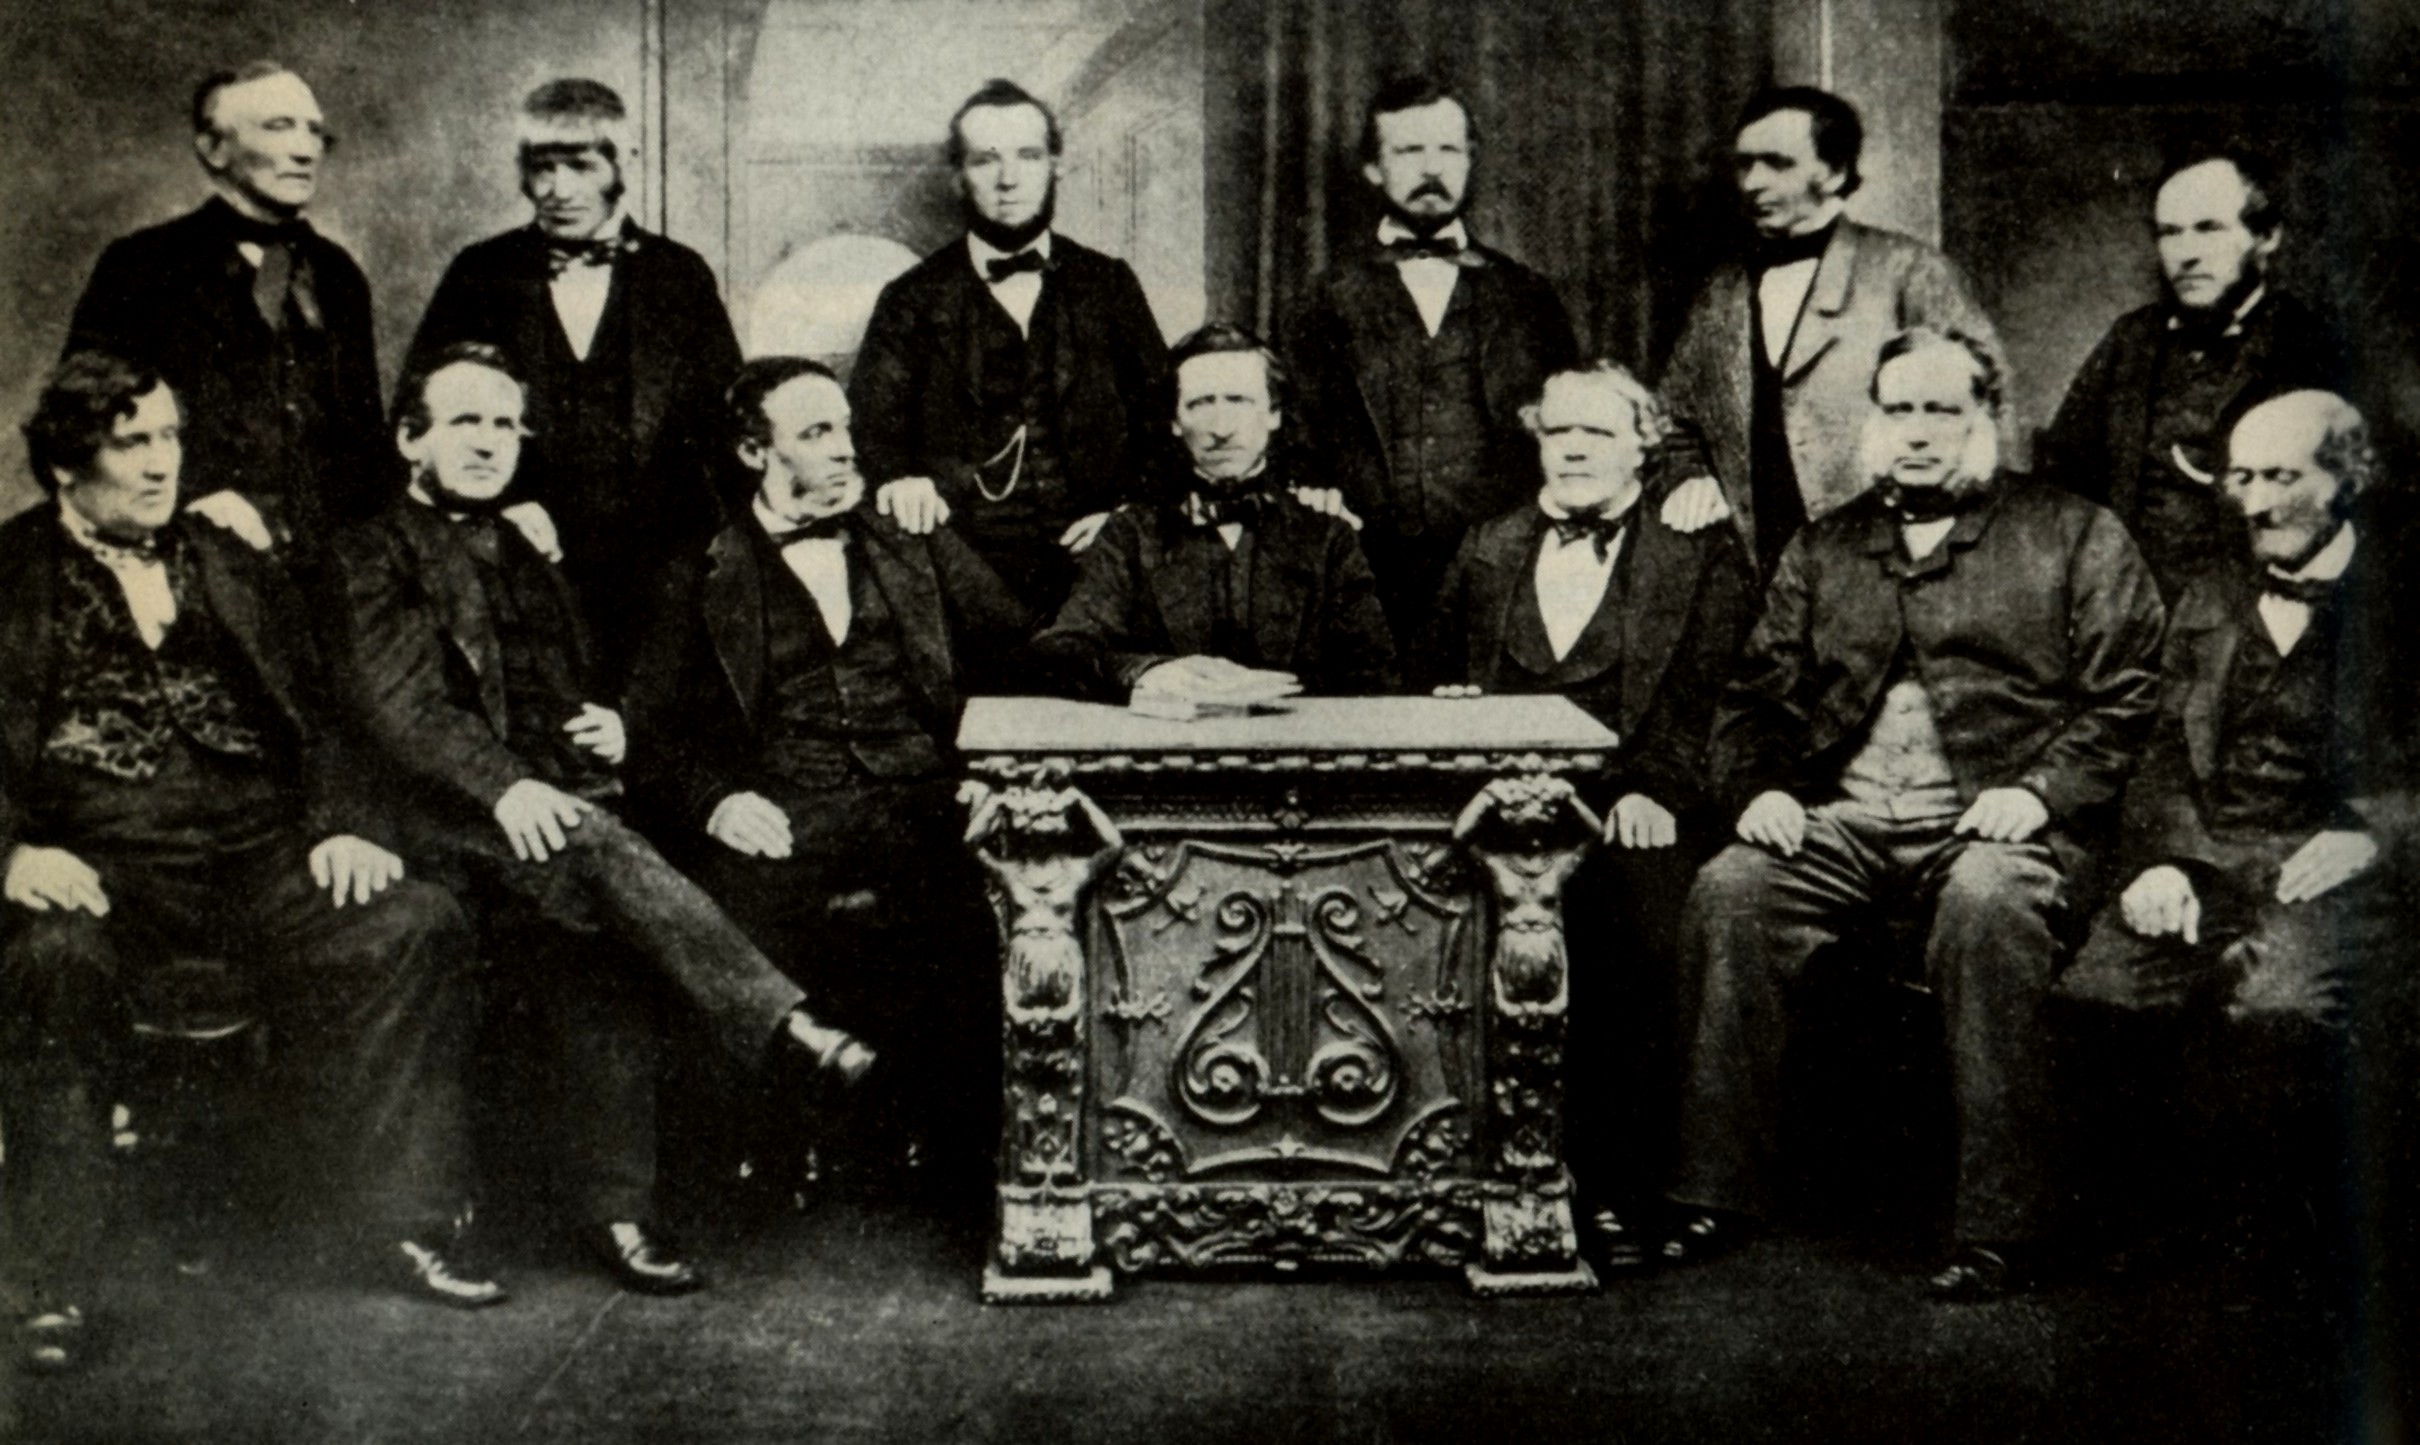  The founding members of the Rochdale Equitable Pioneer Society, circa 1870.